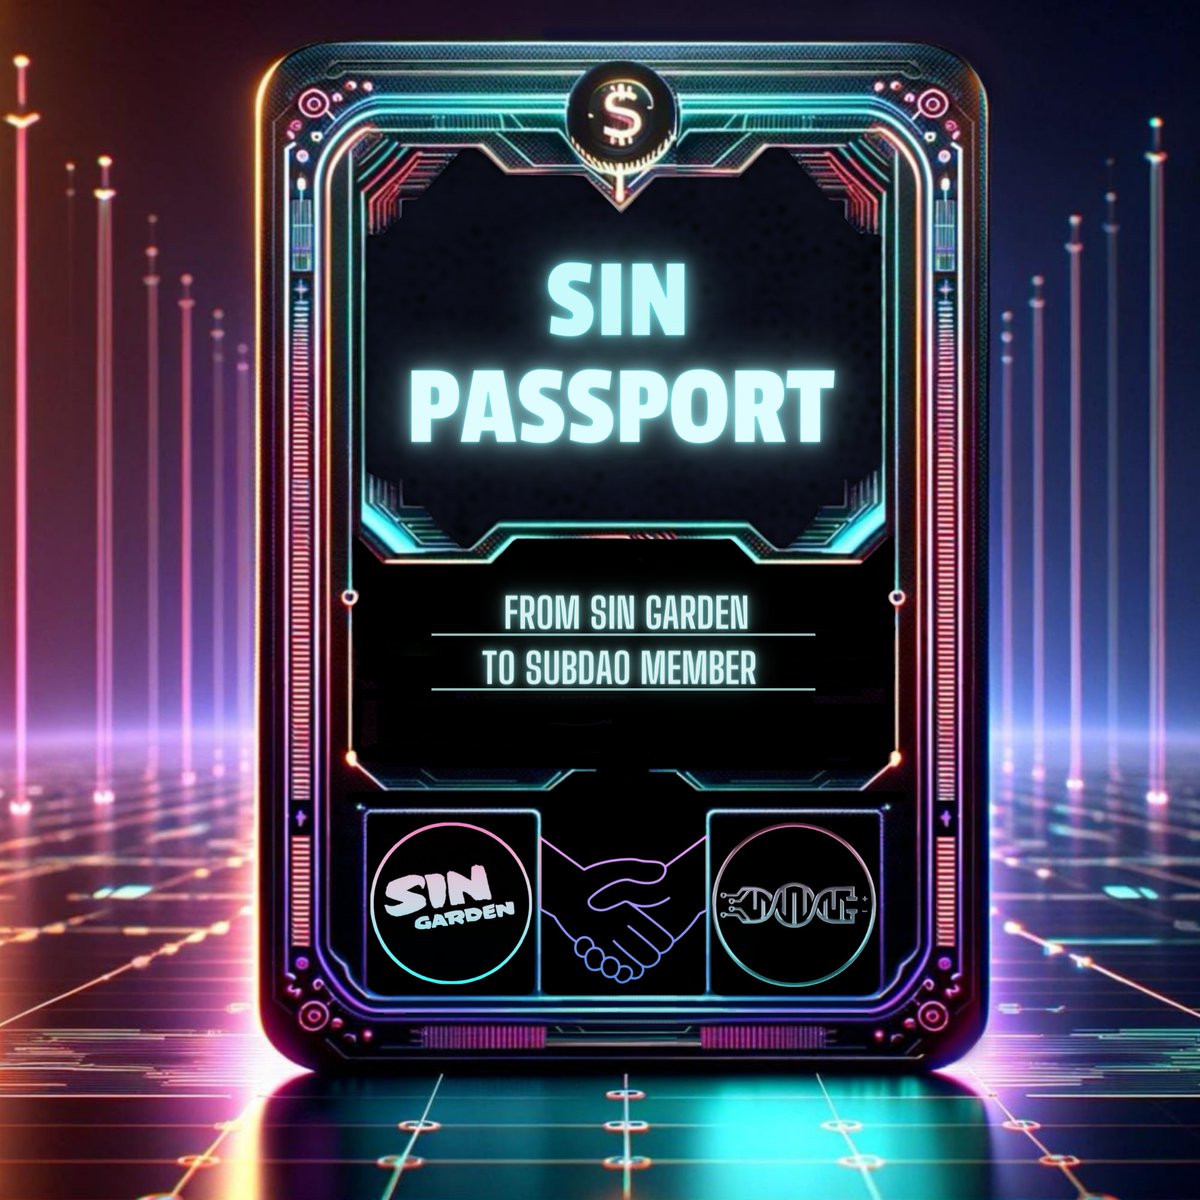 Long-awaited news on joining SubDao Sin Garden.

Dear applicants for joining the DAO, today you found an NFT passport in your wallet, congratulations, next week you will have the opportunity to deposit this NFT as collateral and join the SubDao Sin Garden in the POSTHUMAN DAO.